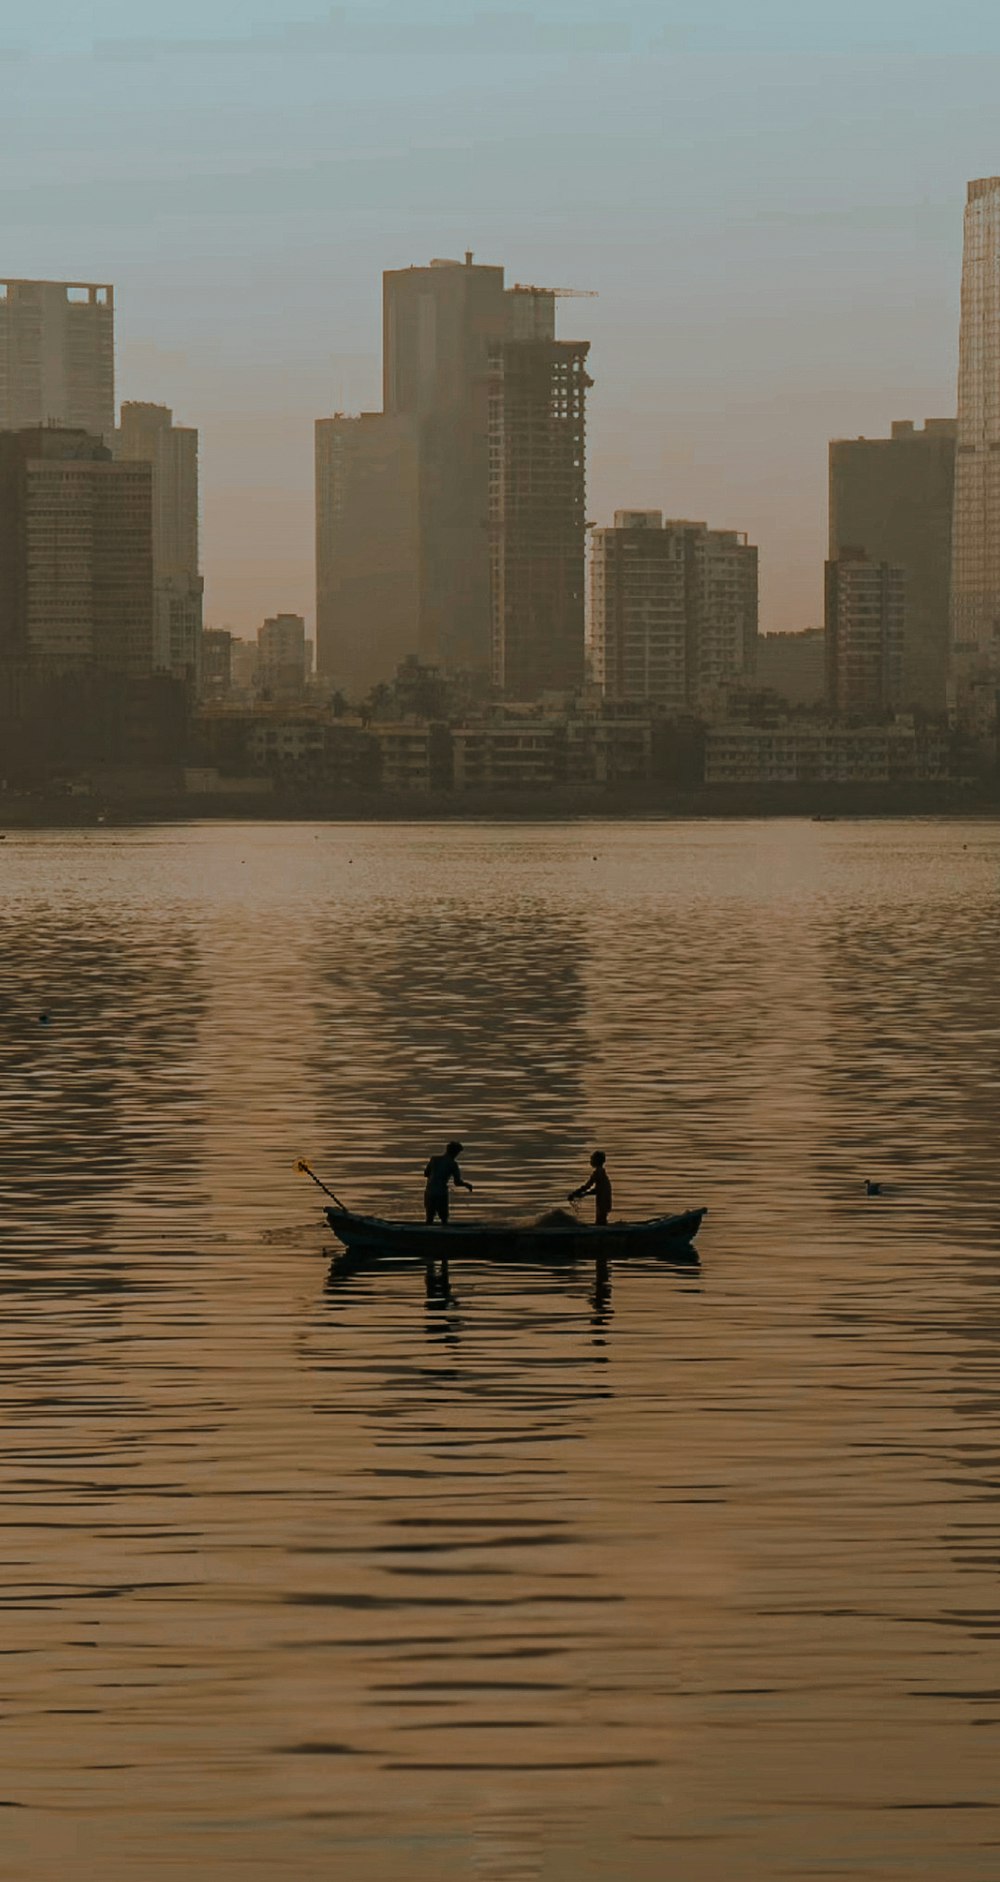 a couple of people in a boat on a body of water with a city in the background